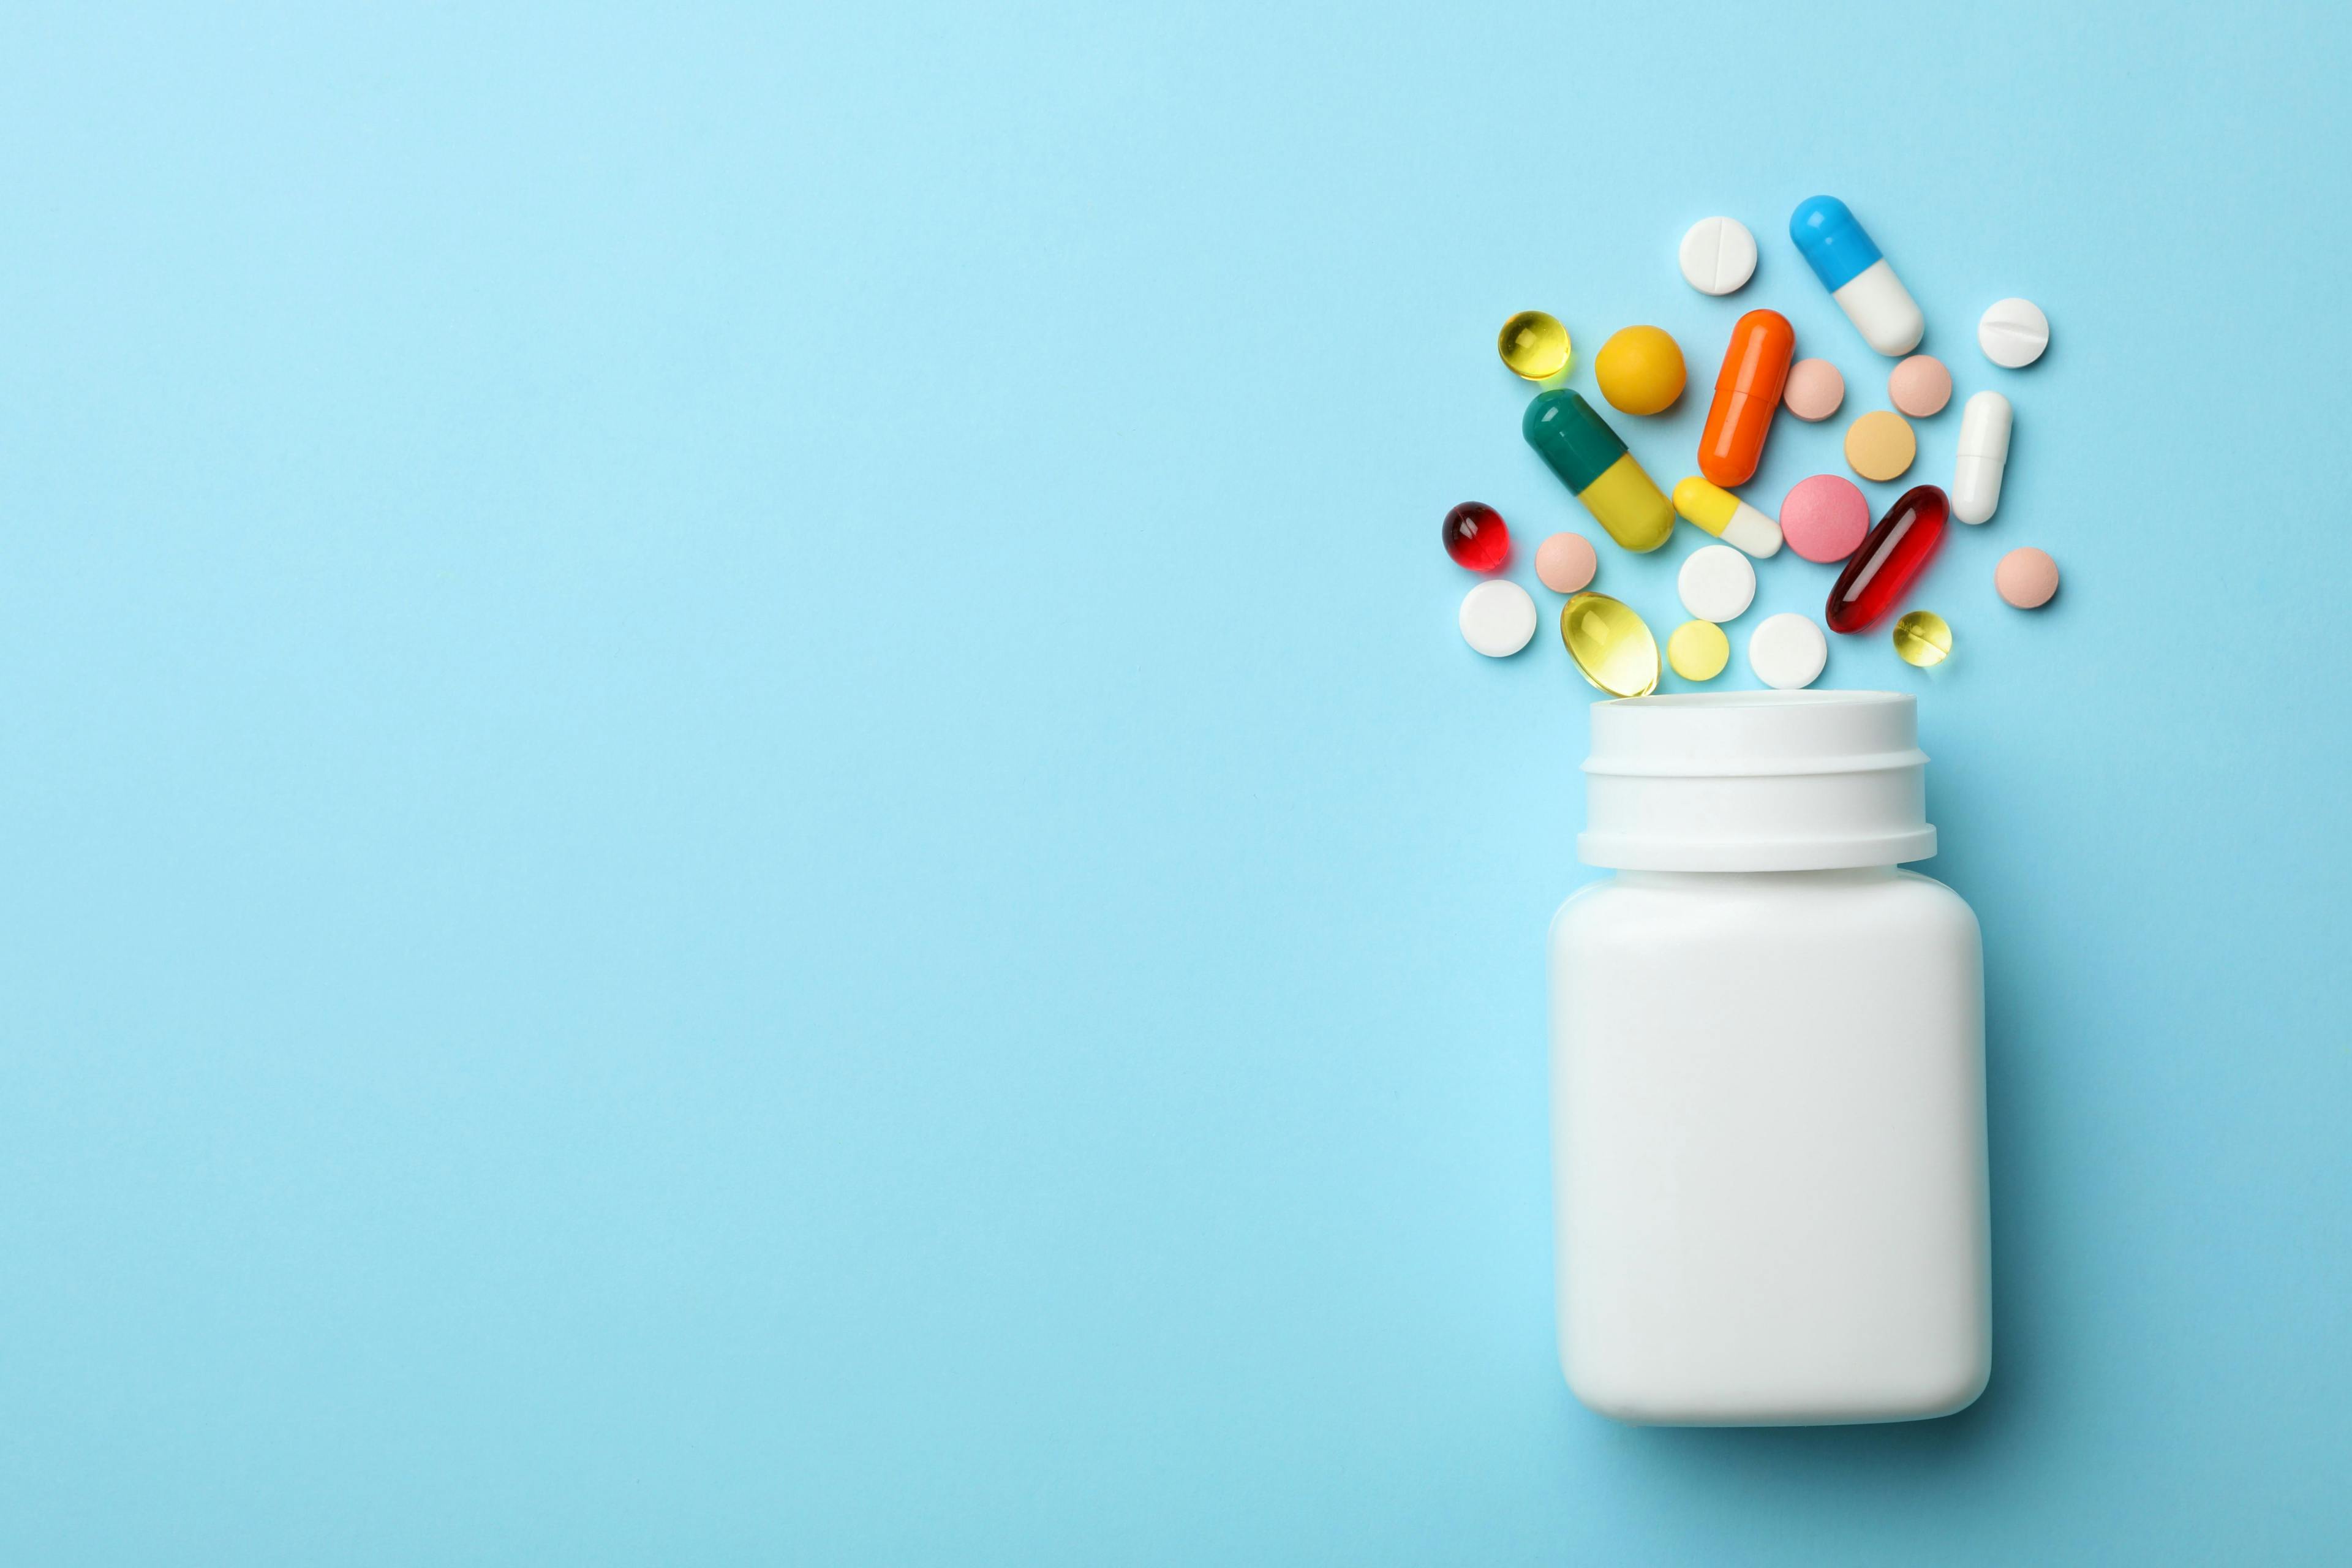 Pharmacists Can Help Reduce Medication Errors